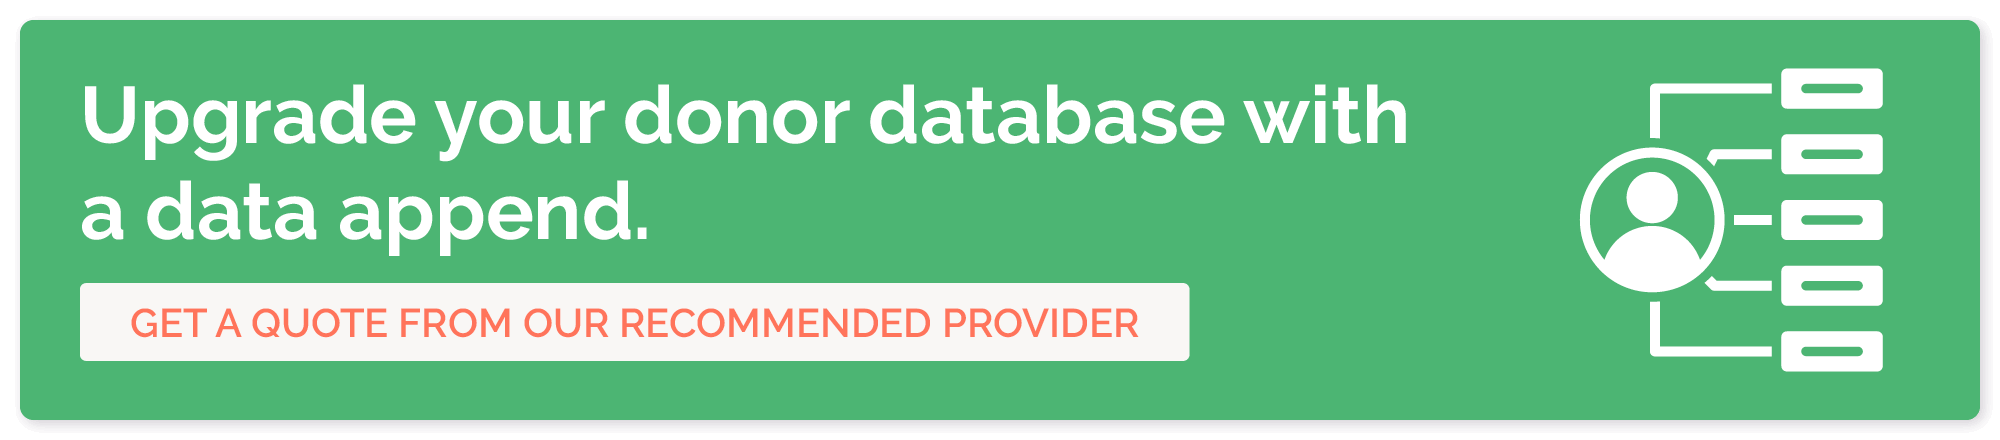 Work with our recommended provider to upgrade your donor database.